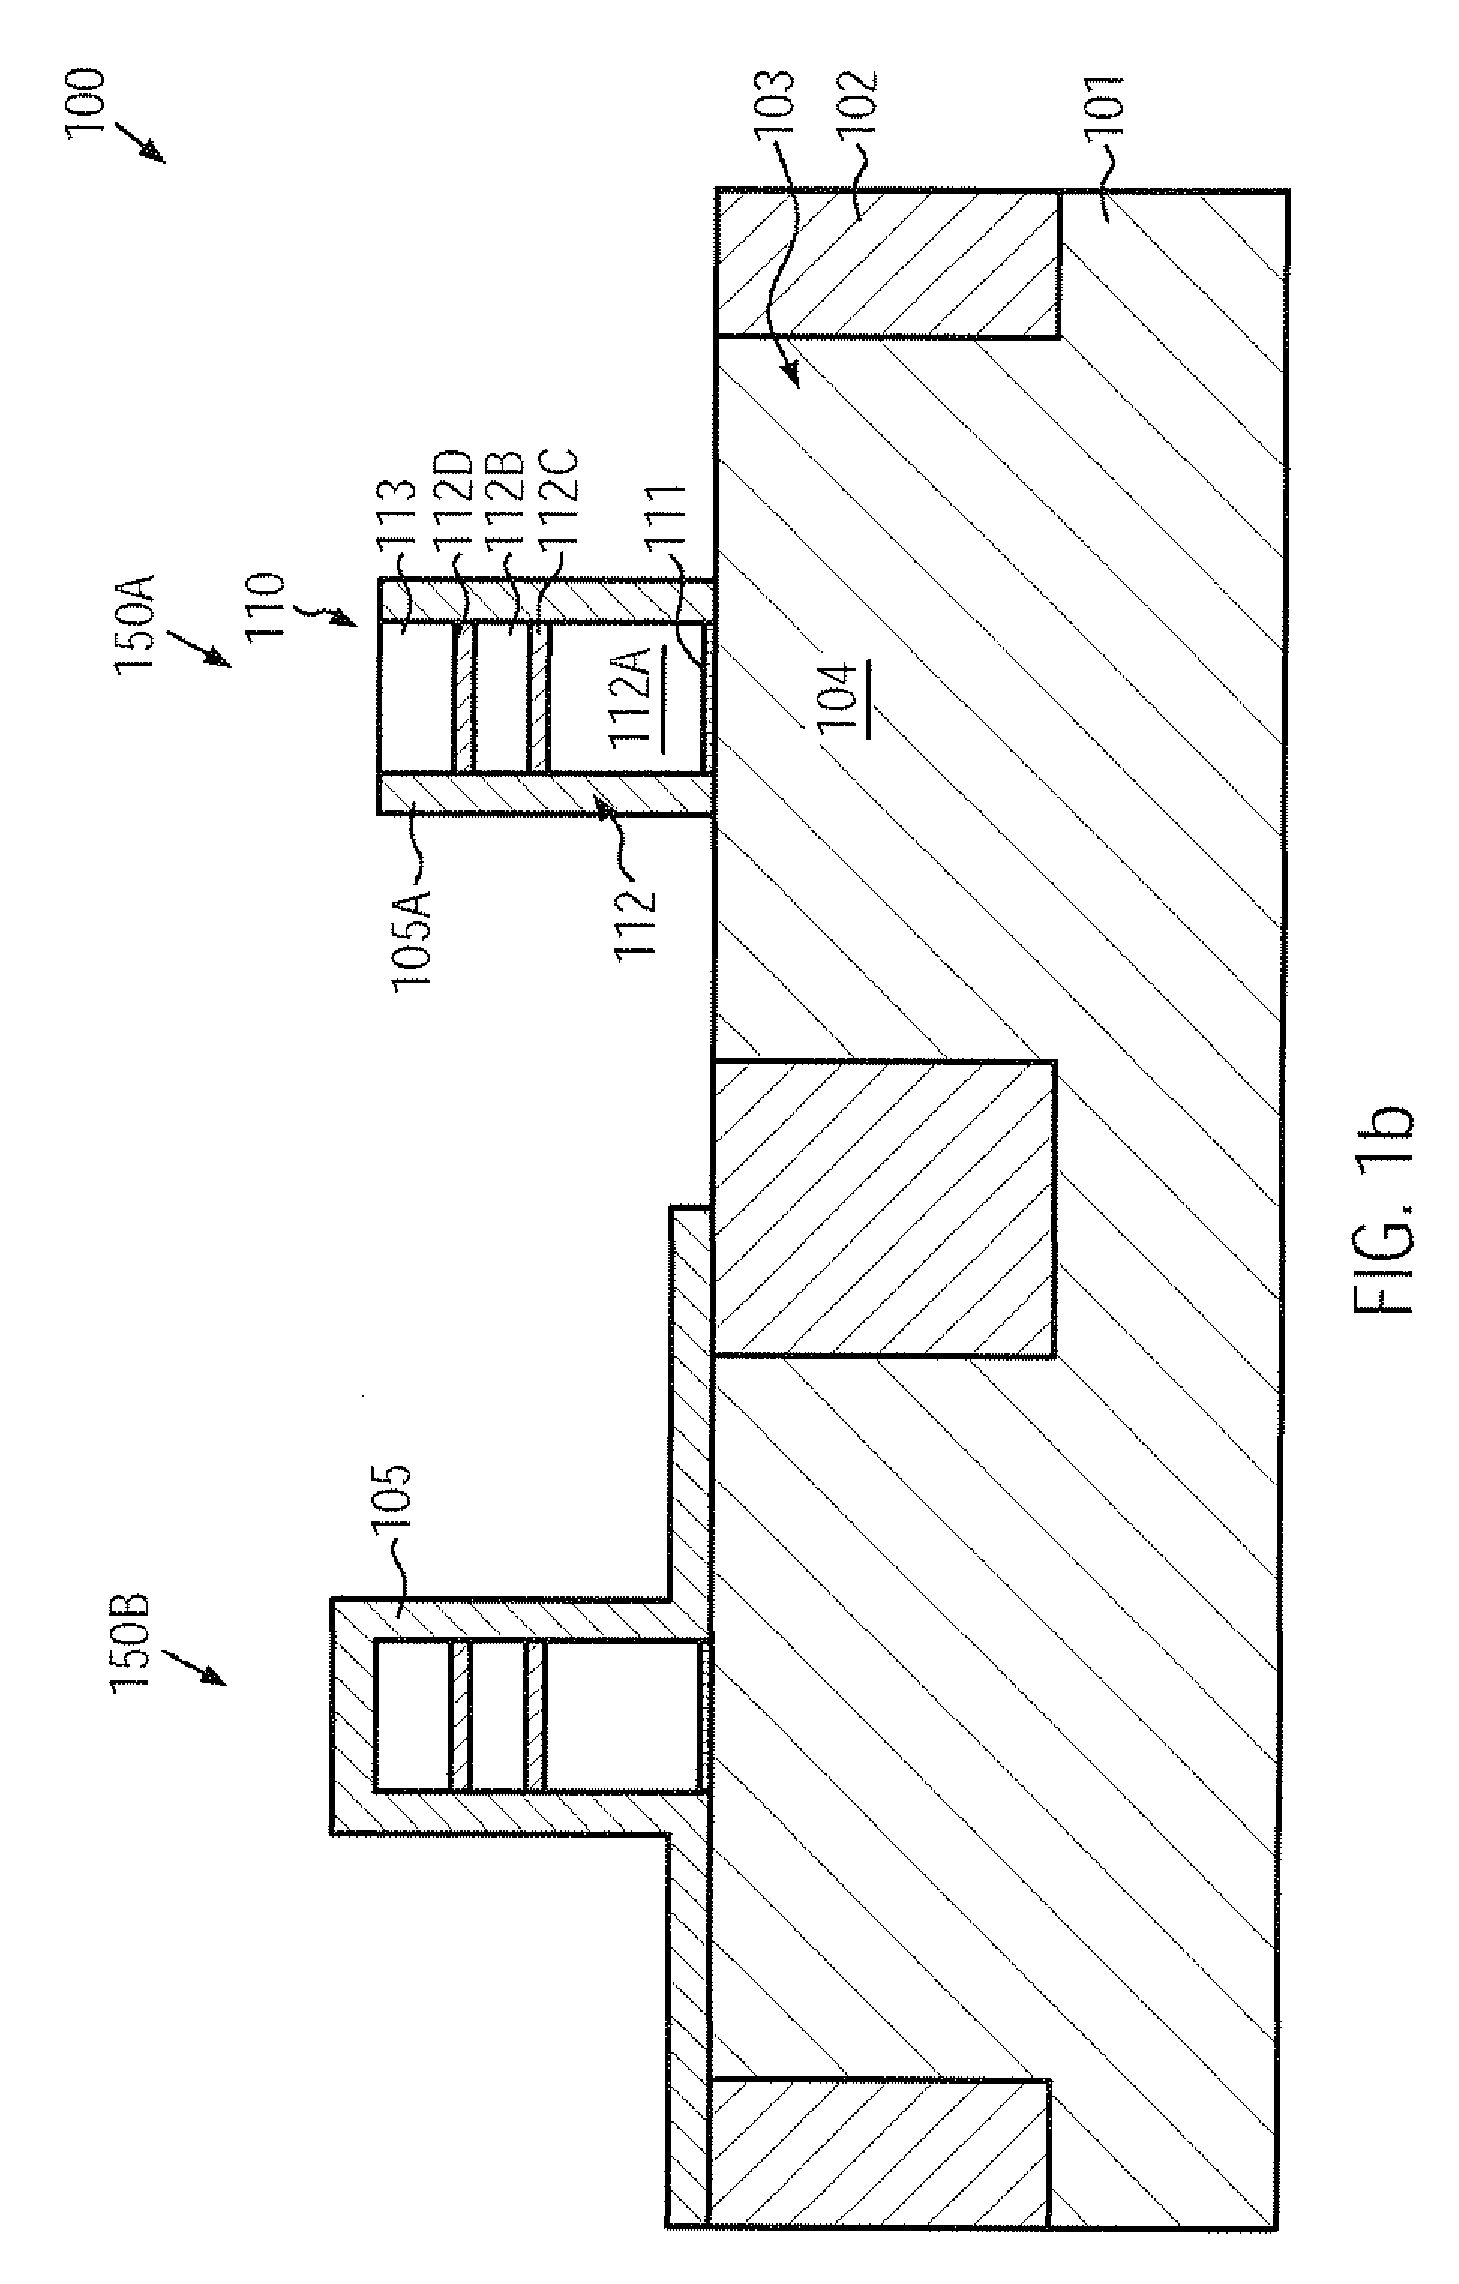 CMOS device comprising mos transistors with recessed drain and source areas and a si/ge material in the drain and source areas of the pmos transistor